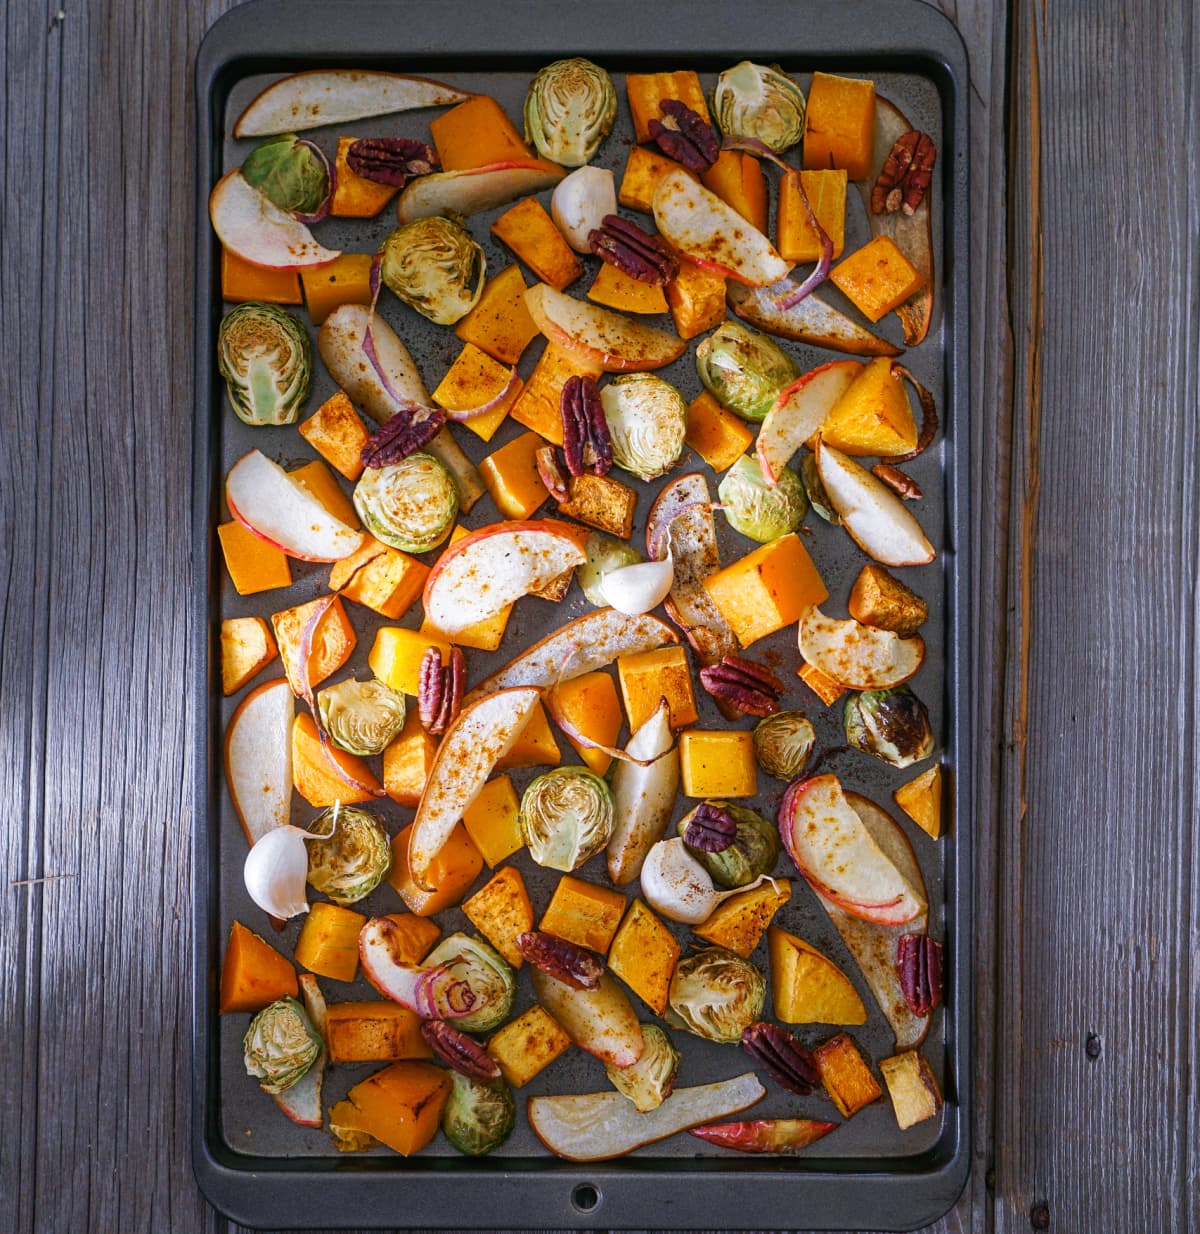 Roasted root vegetables on a baking sheet: sweet potato, butternut squash, brussels sprouts, apple, pecans and pear. Toning. Healthy eating concept.